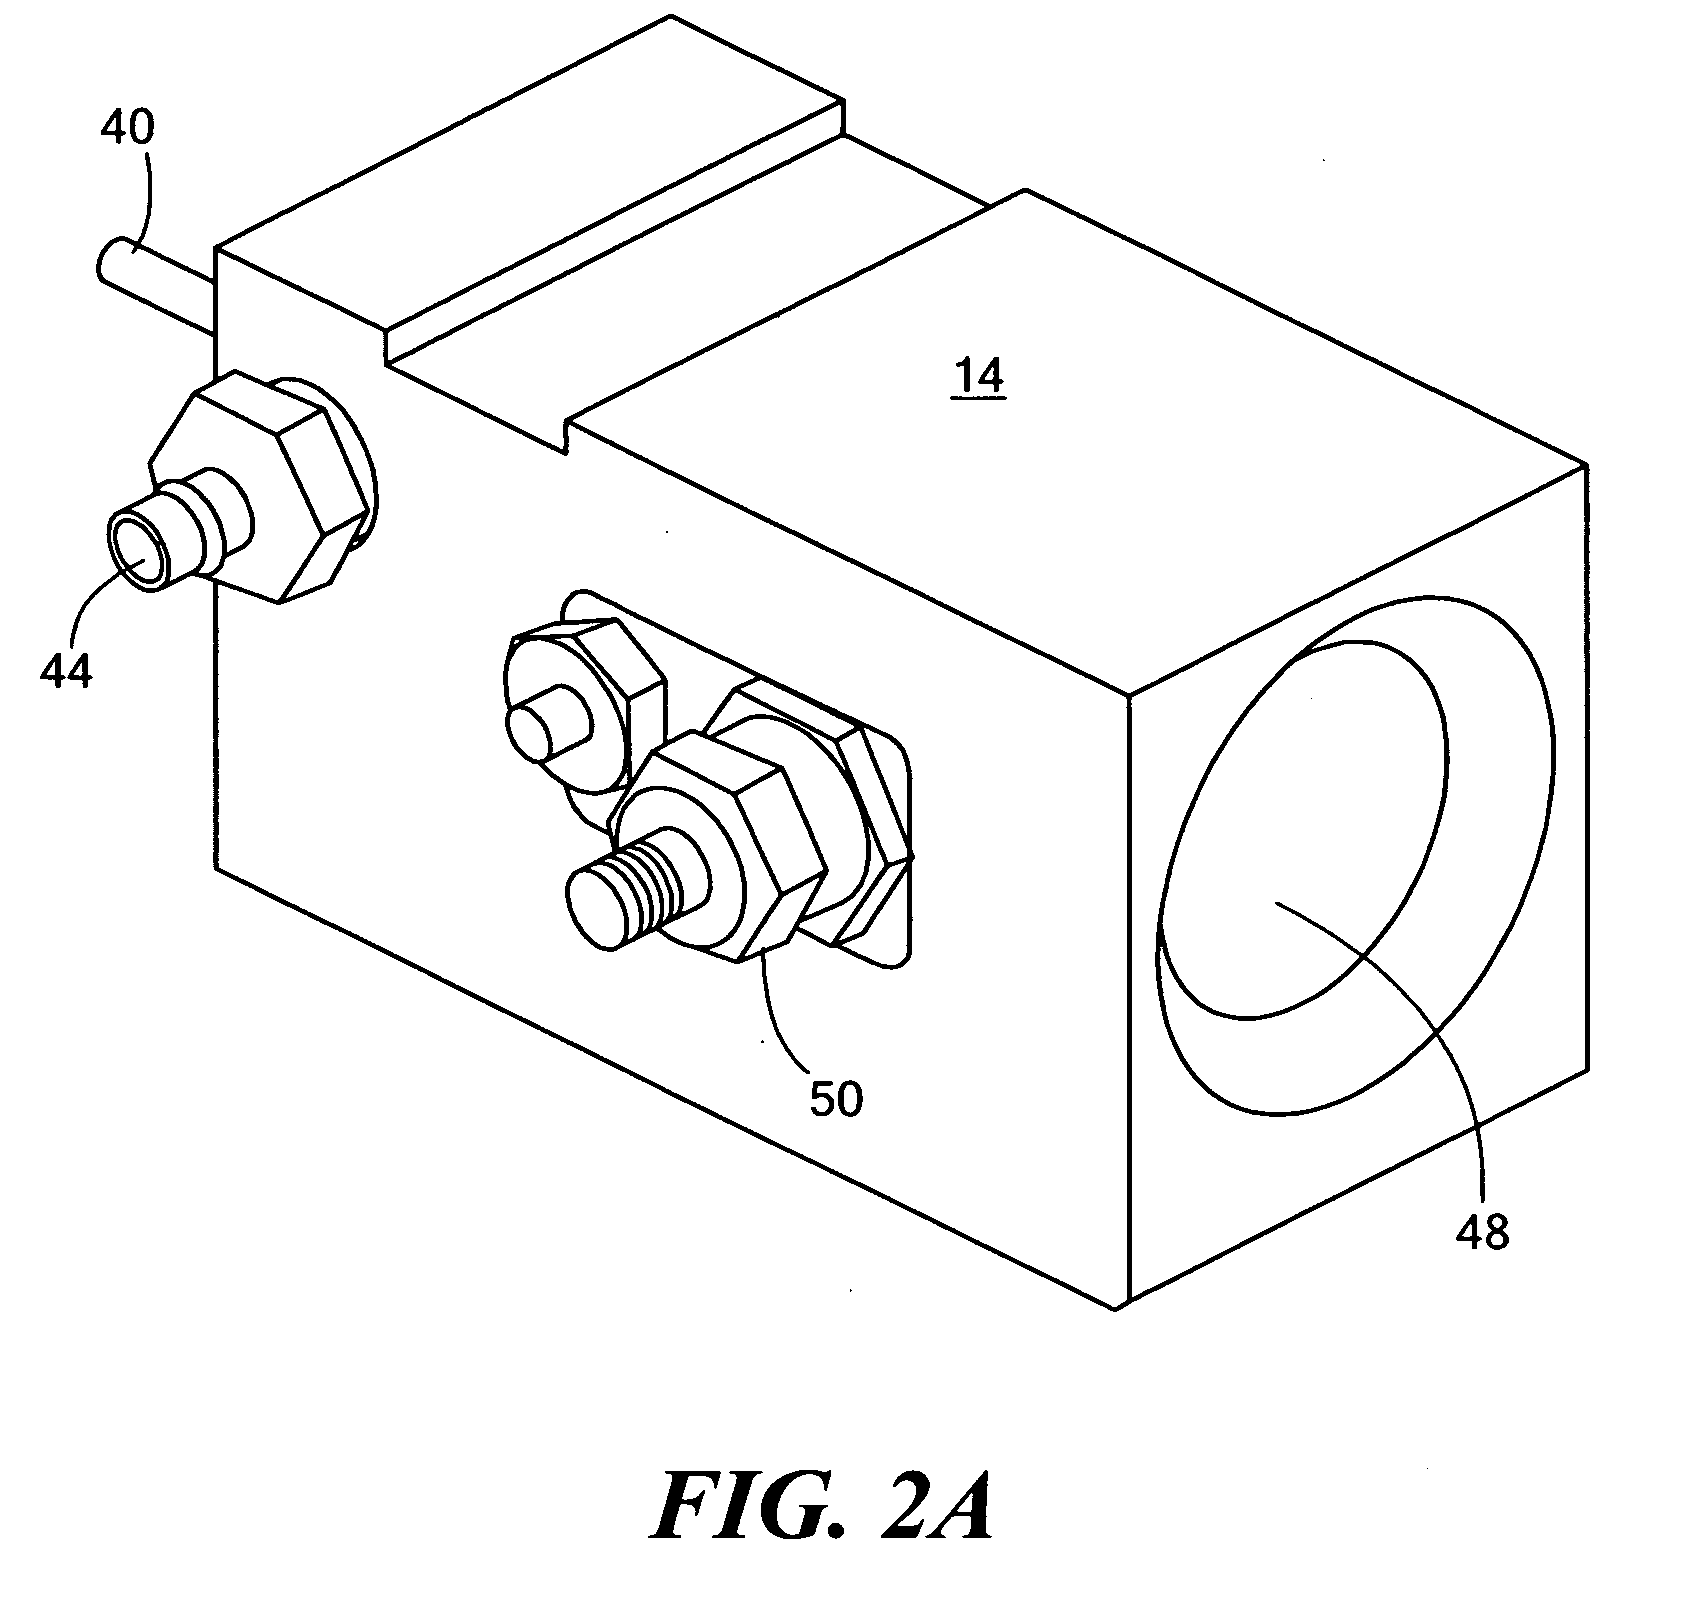 Supplemental air system for a portable, instrinsically safe, flame ionization detector (FID) device